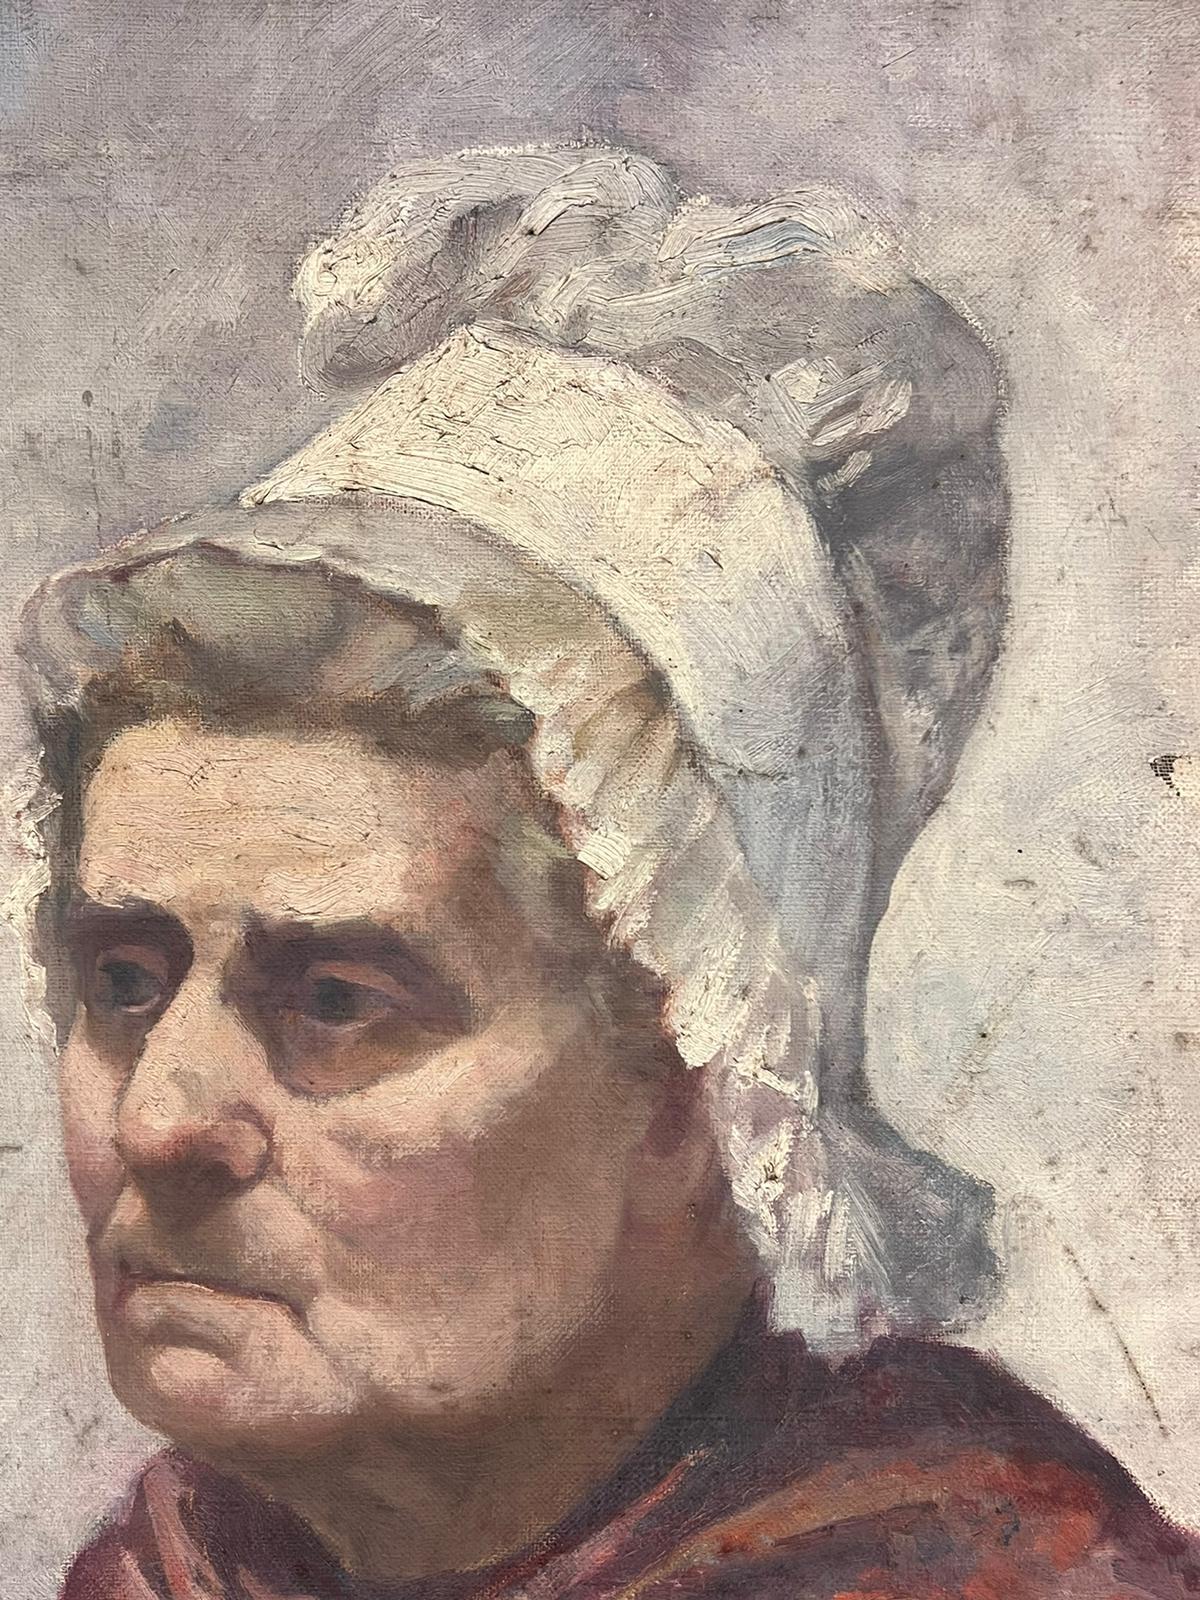 Portrait of a Lady
French School, early 20th century
oil on canvas, unframed
canvas: 18 x 15 inches
provenance: private collection
condition: some wear, scuffing and signs of age but all in all is in sound condition 